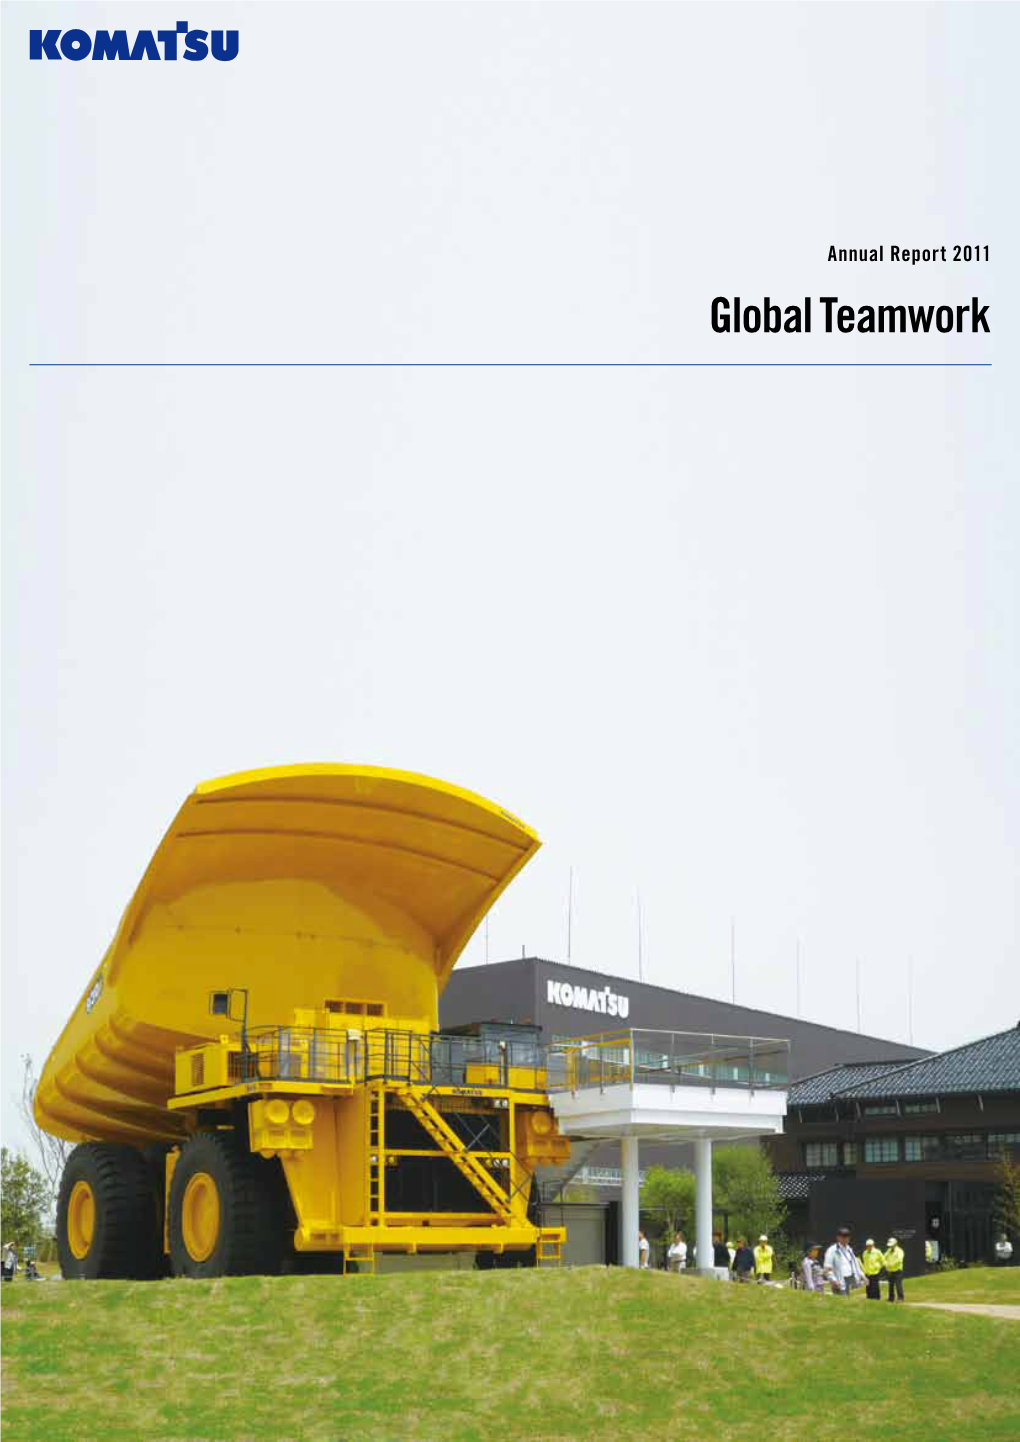 Global Teamwork Contents Annual Report 2011